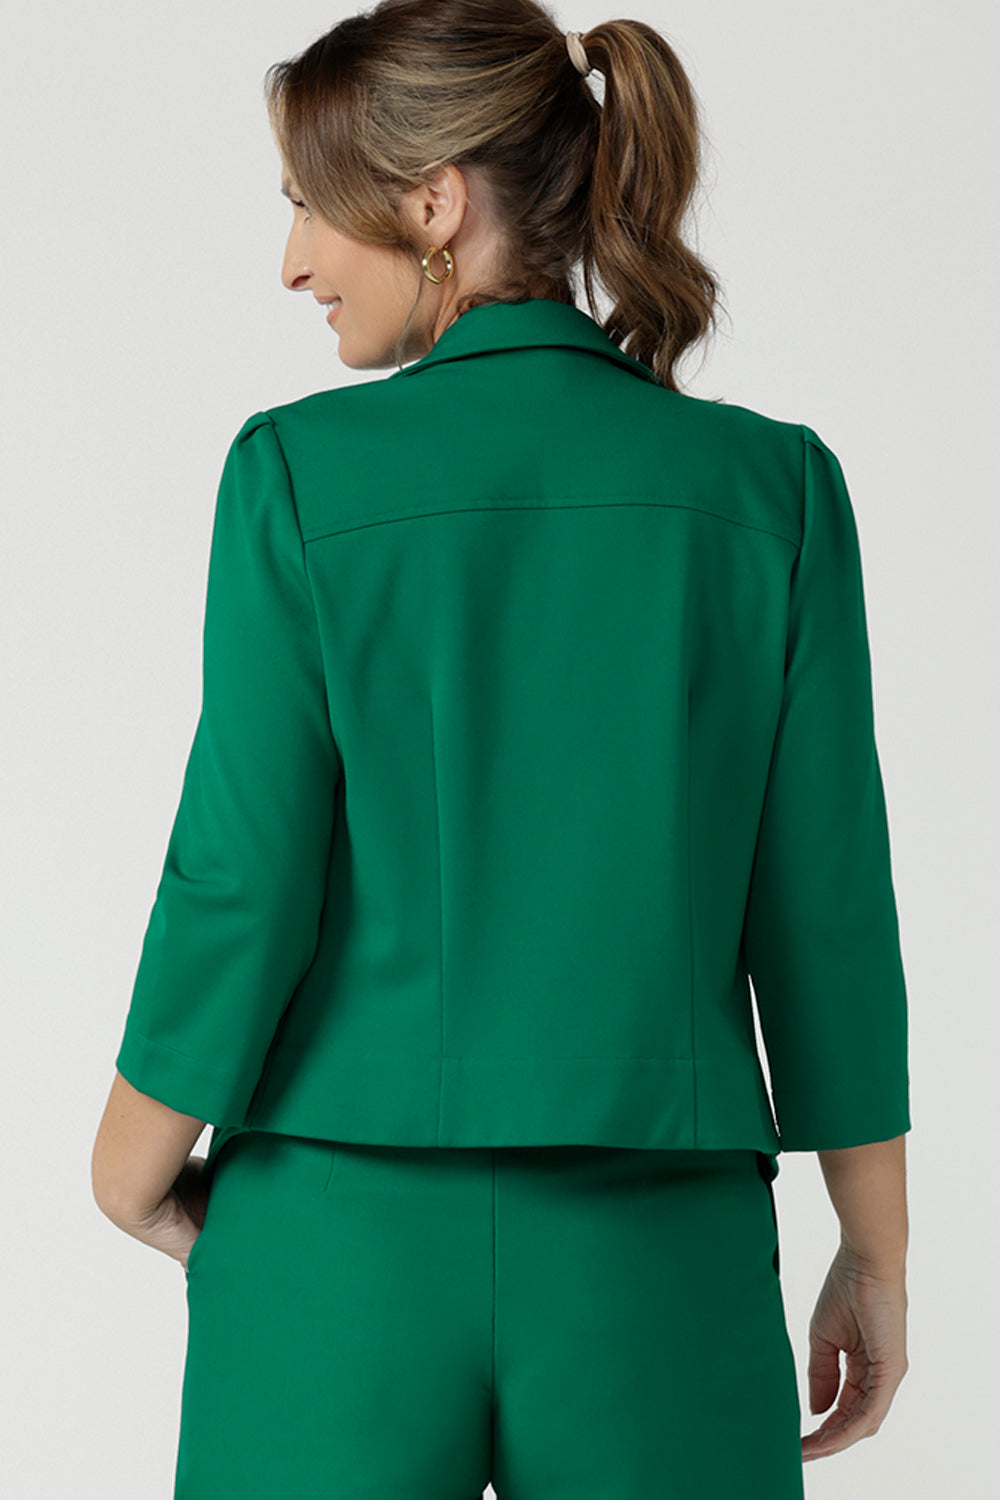 Back view of a size 10 woman wearing a tailored jacket with open front and collar and notch lapels is made in Emerald green ponte fabric. Shop exclusive luxury, this work jacket is available from Australian and New Zealand women's clothing label, L&F.